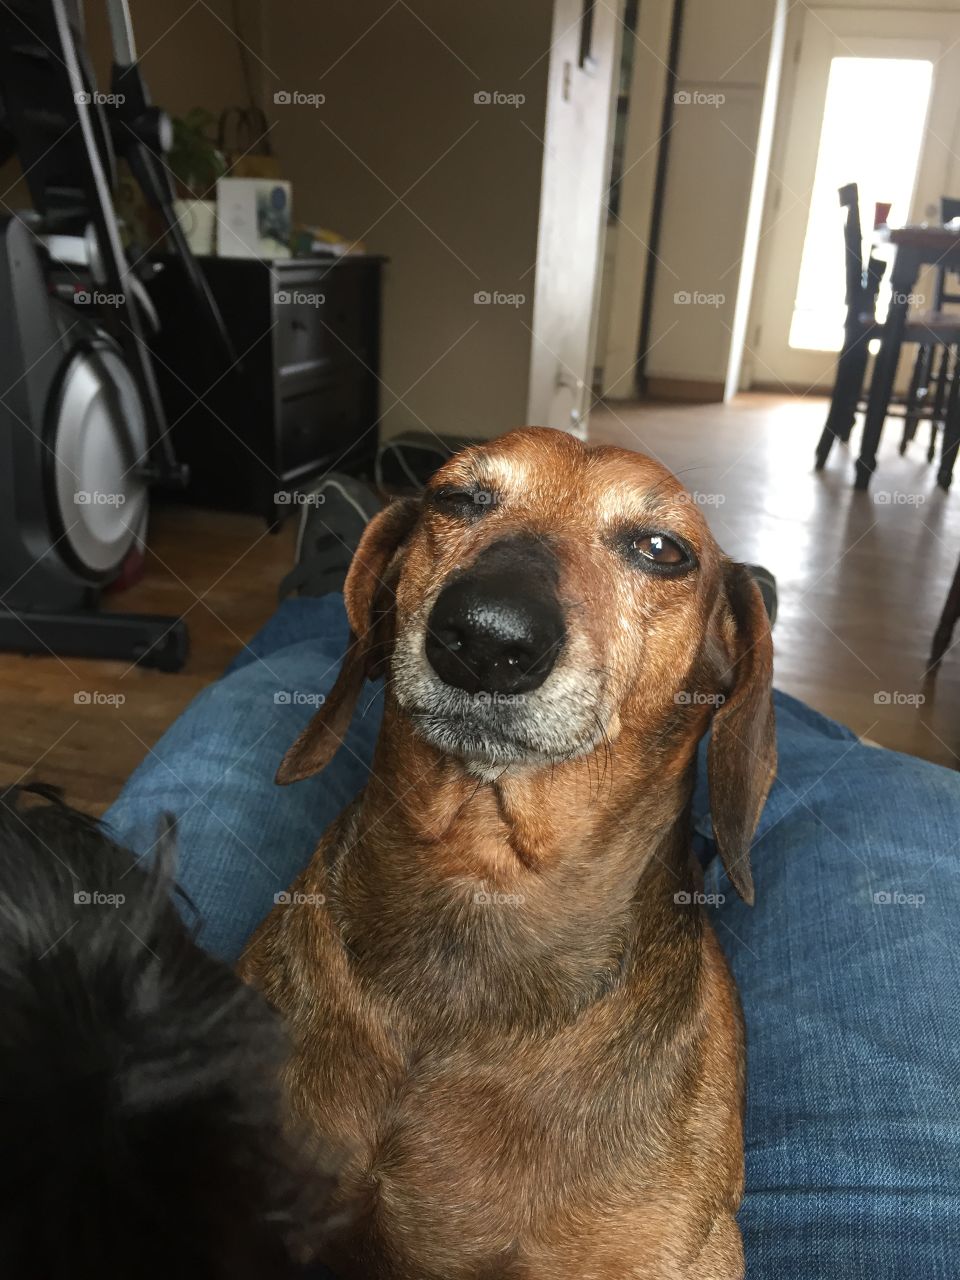 My dog, Peck, a senior dachshund, winks at the camera as I snap a picture.